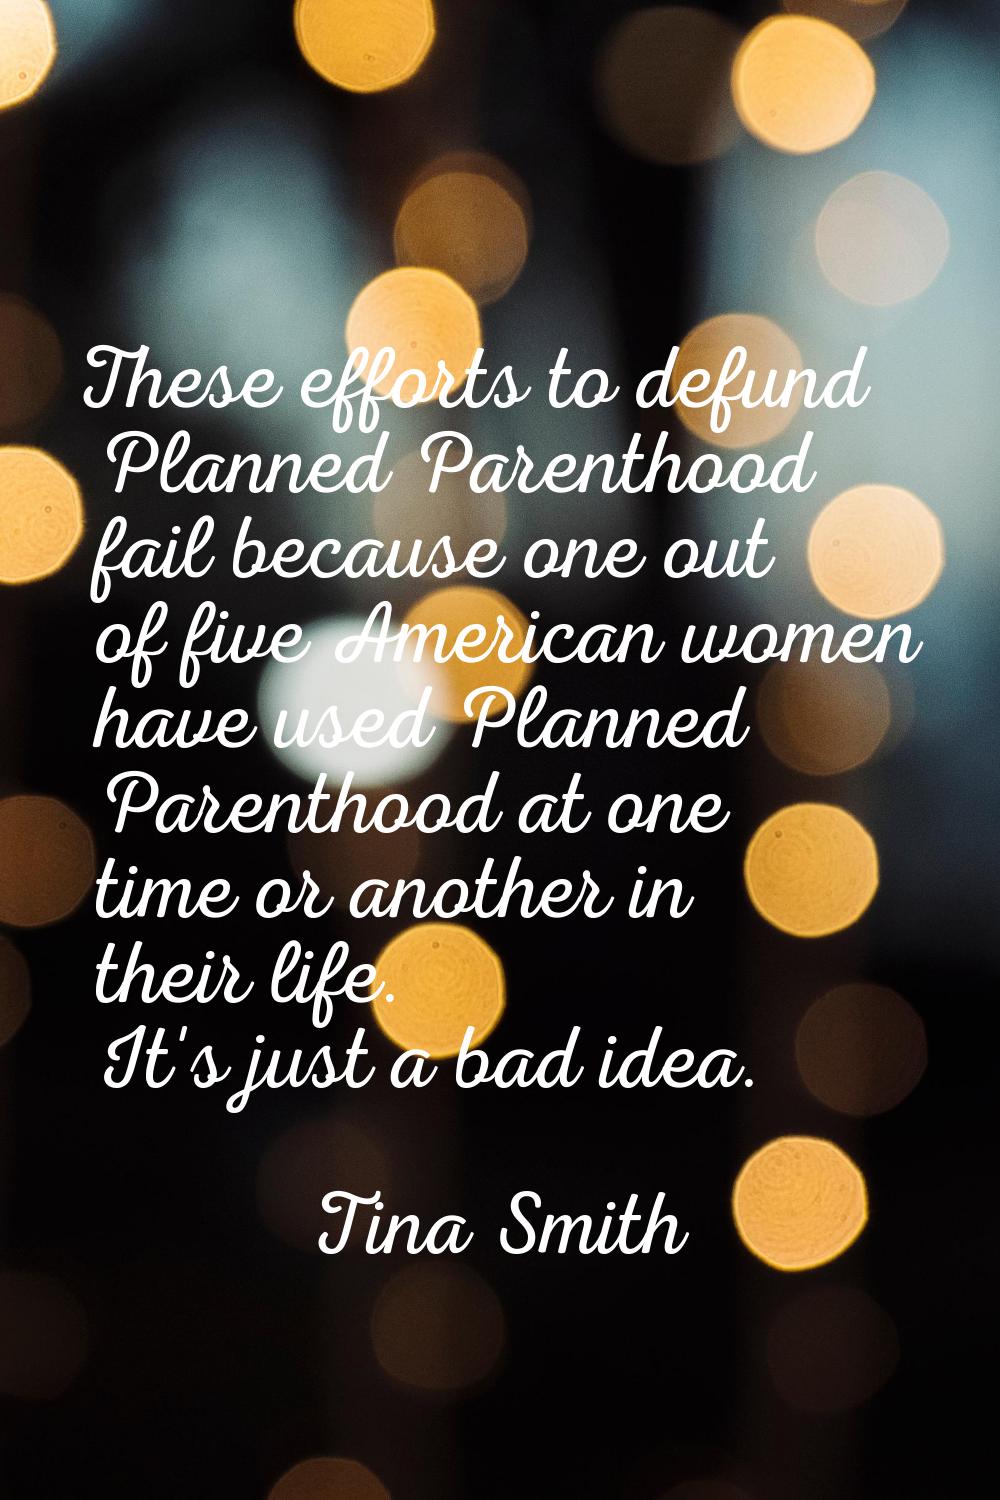 These efforts to defund Planned Parenthood fail because one out of five American women have used Pl